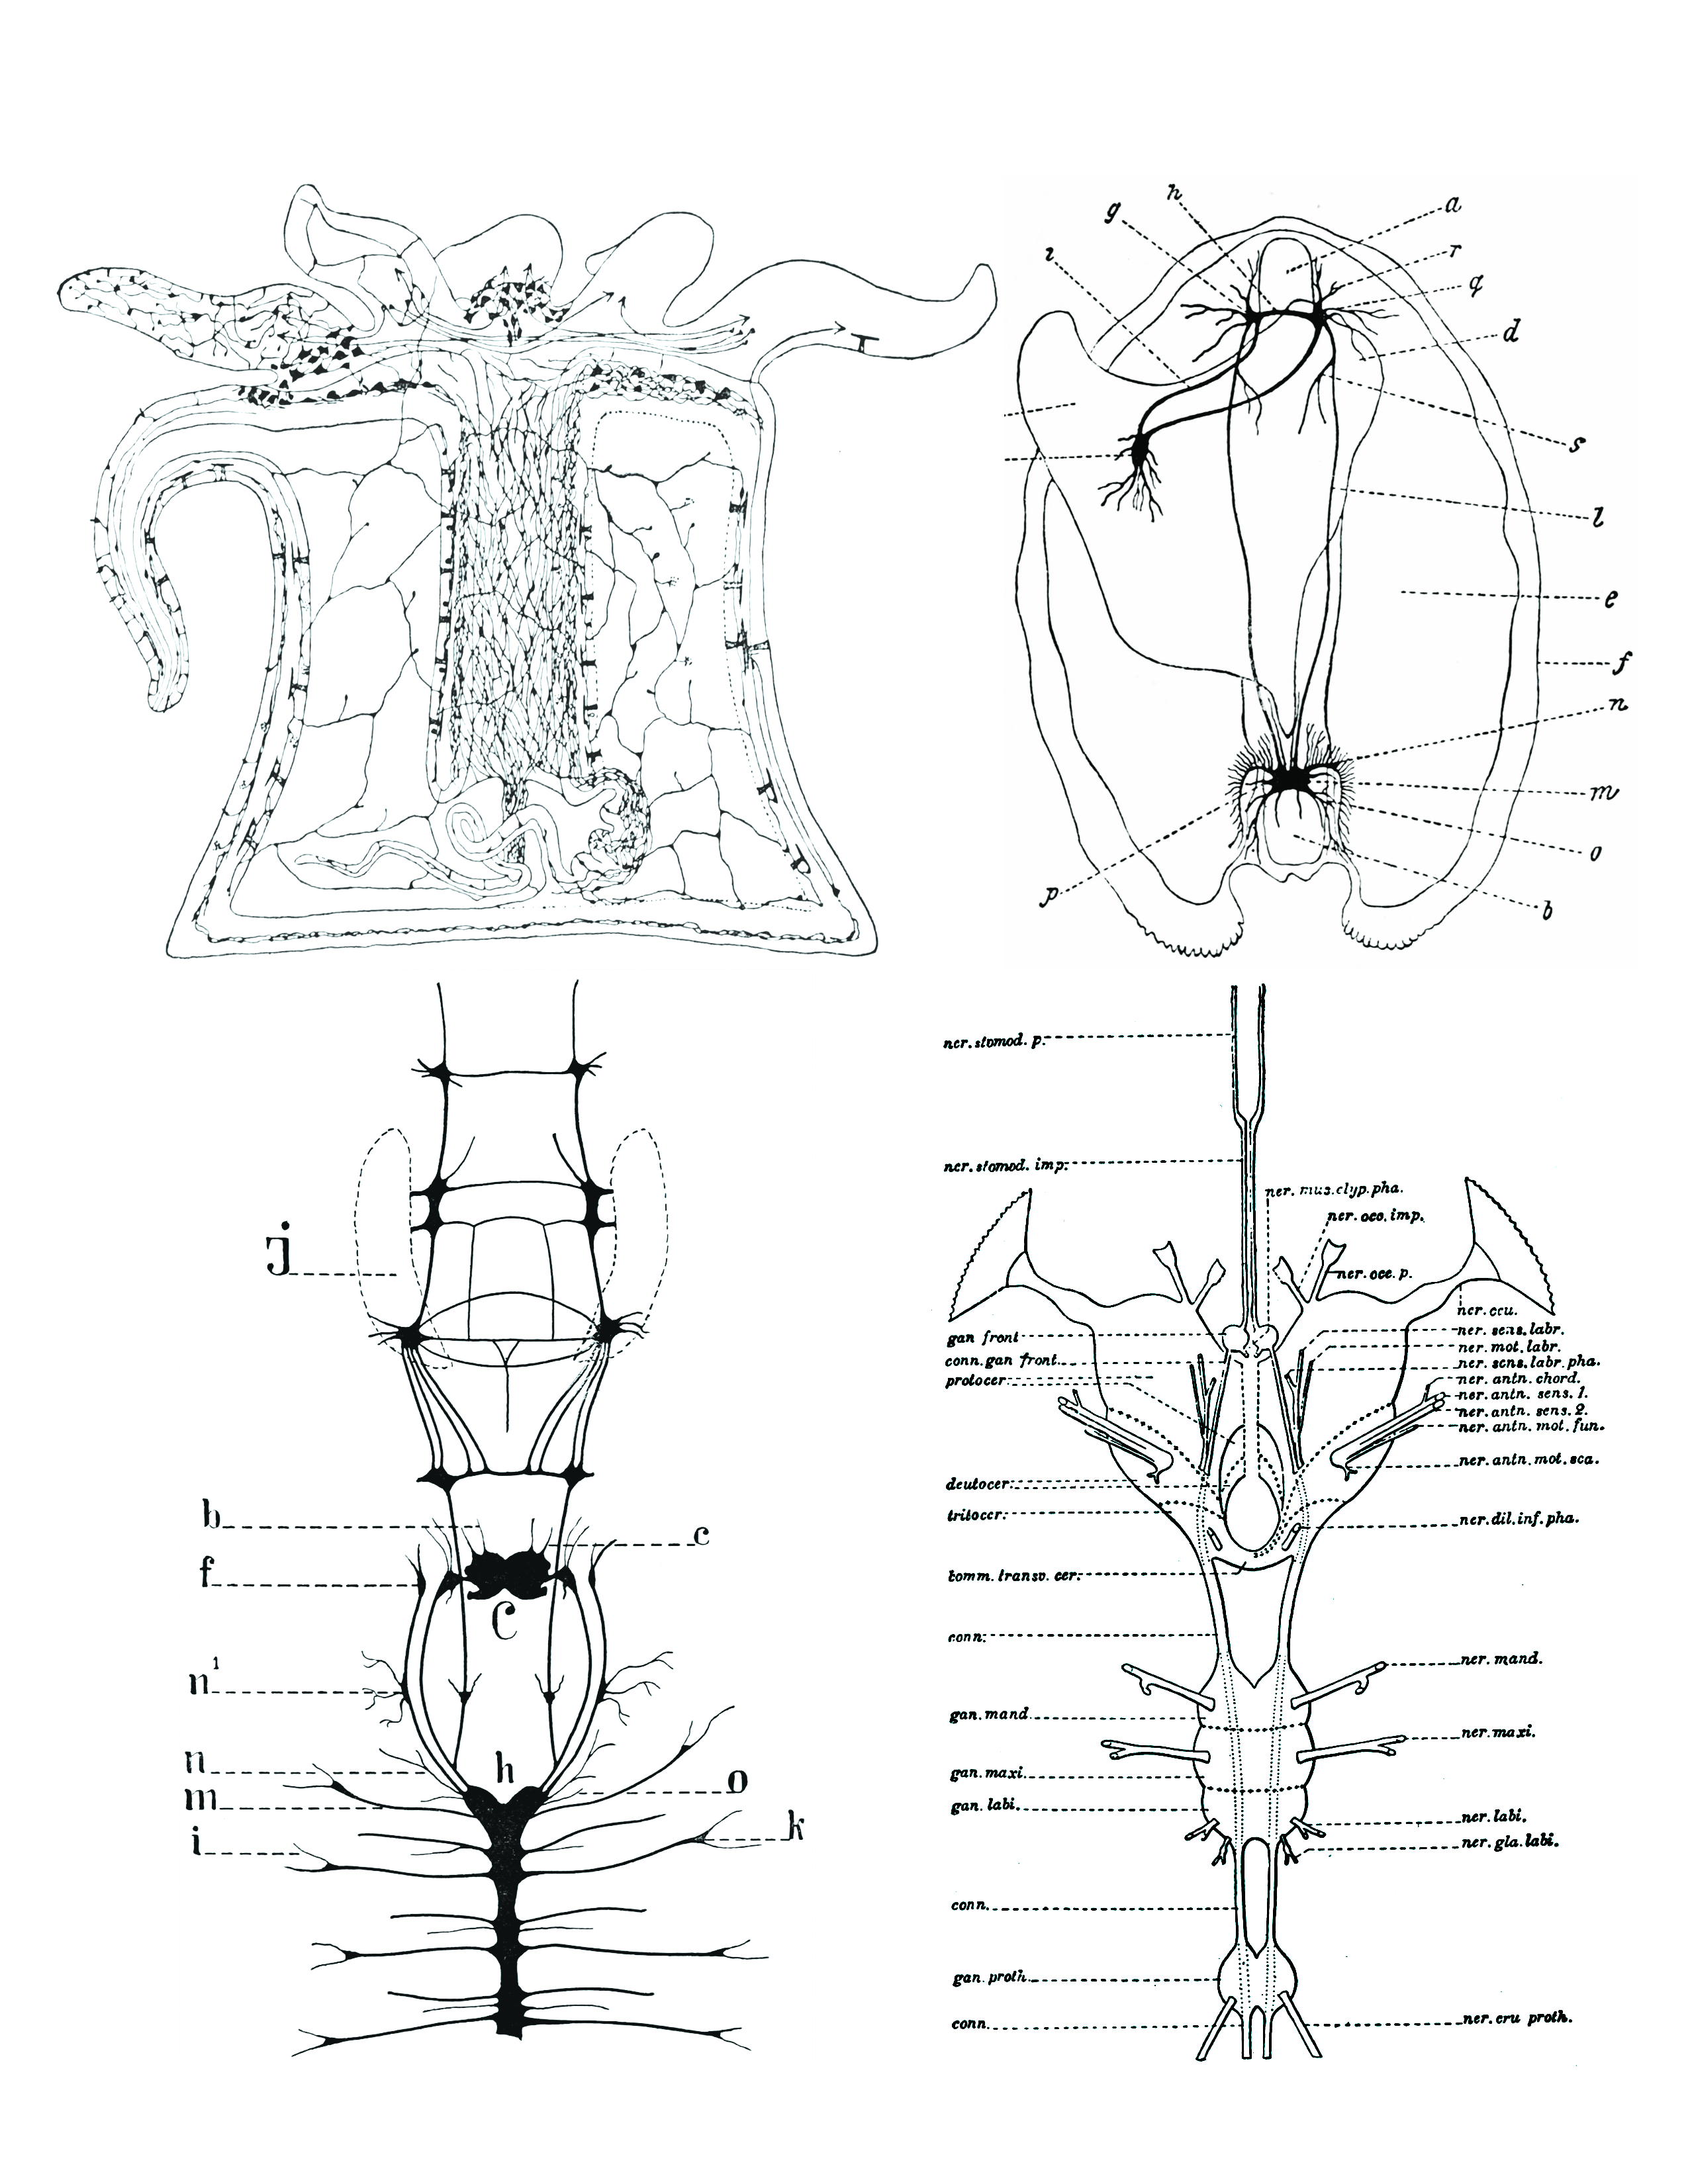 Comparison of nervous systems of invertebrates. Top left: A diffuse nerve net in Actinia (a genus of sea anemones in the family Actiniidae in the phylum Cnidaria); top right: The nervous system of Anadonta anatina, a freshwater mussel in the family Unionidae in the phylum Mollusca. c, foot; k, pedal ganglion; i, cerebro-pedal connective; g, cerebral ganglion; h, cerebral connective; a, anterior adductor muscle; r, q, anterior pallial nerves; d, liver; s, visceral nerve; l, cerebro-visceral connective; e, gill; f, edge of mantle; n, branchial nerves; m, visceral ganglion; o, posterior pallial nerves; b, posterior adductor muscle; p, lateral pallial nerves; bottom left: the nervous system of Alitta virens, a polychaete worm in the phylum Annelida. J, jaws; b, antennal nerves; c, palpal nerves; f, ganglia for the dorsal peristomial cirri; n1 , ganglion; n, nerves for the dissepimenta; m, parapodial nerves; i, parapodial branch; h, ventral chain of ganglia; C, cerebral ganglion; o, nerve passing through dissepiment to preceding segment; k, parapodial ganglion. Bottom right: the nervous system of an insect (Arthropoda). From Morphology of invertebrate types, by Alexander Petrunkevitch. New York, Macmillan company, 1916.